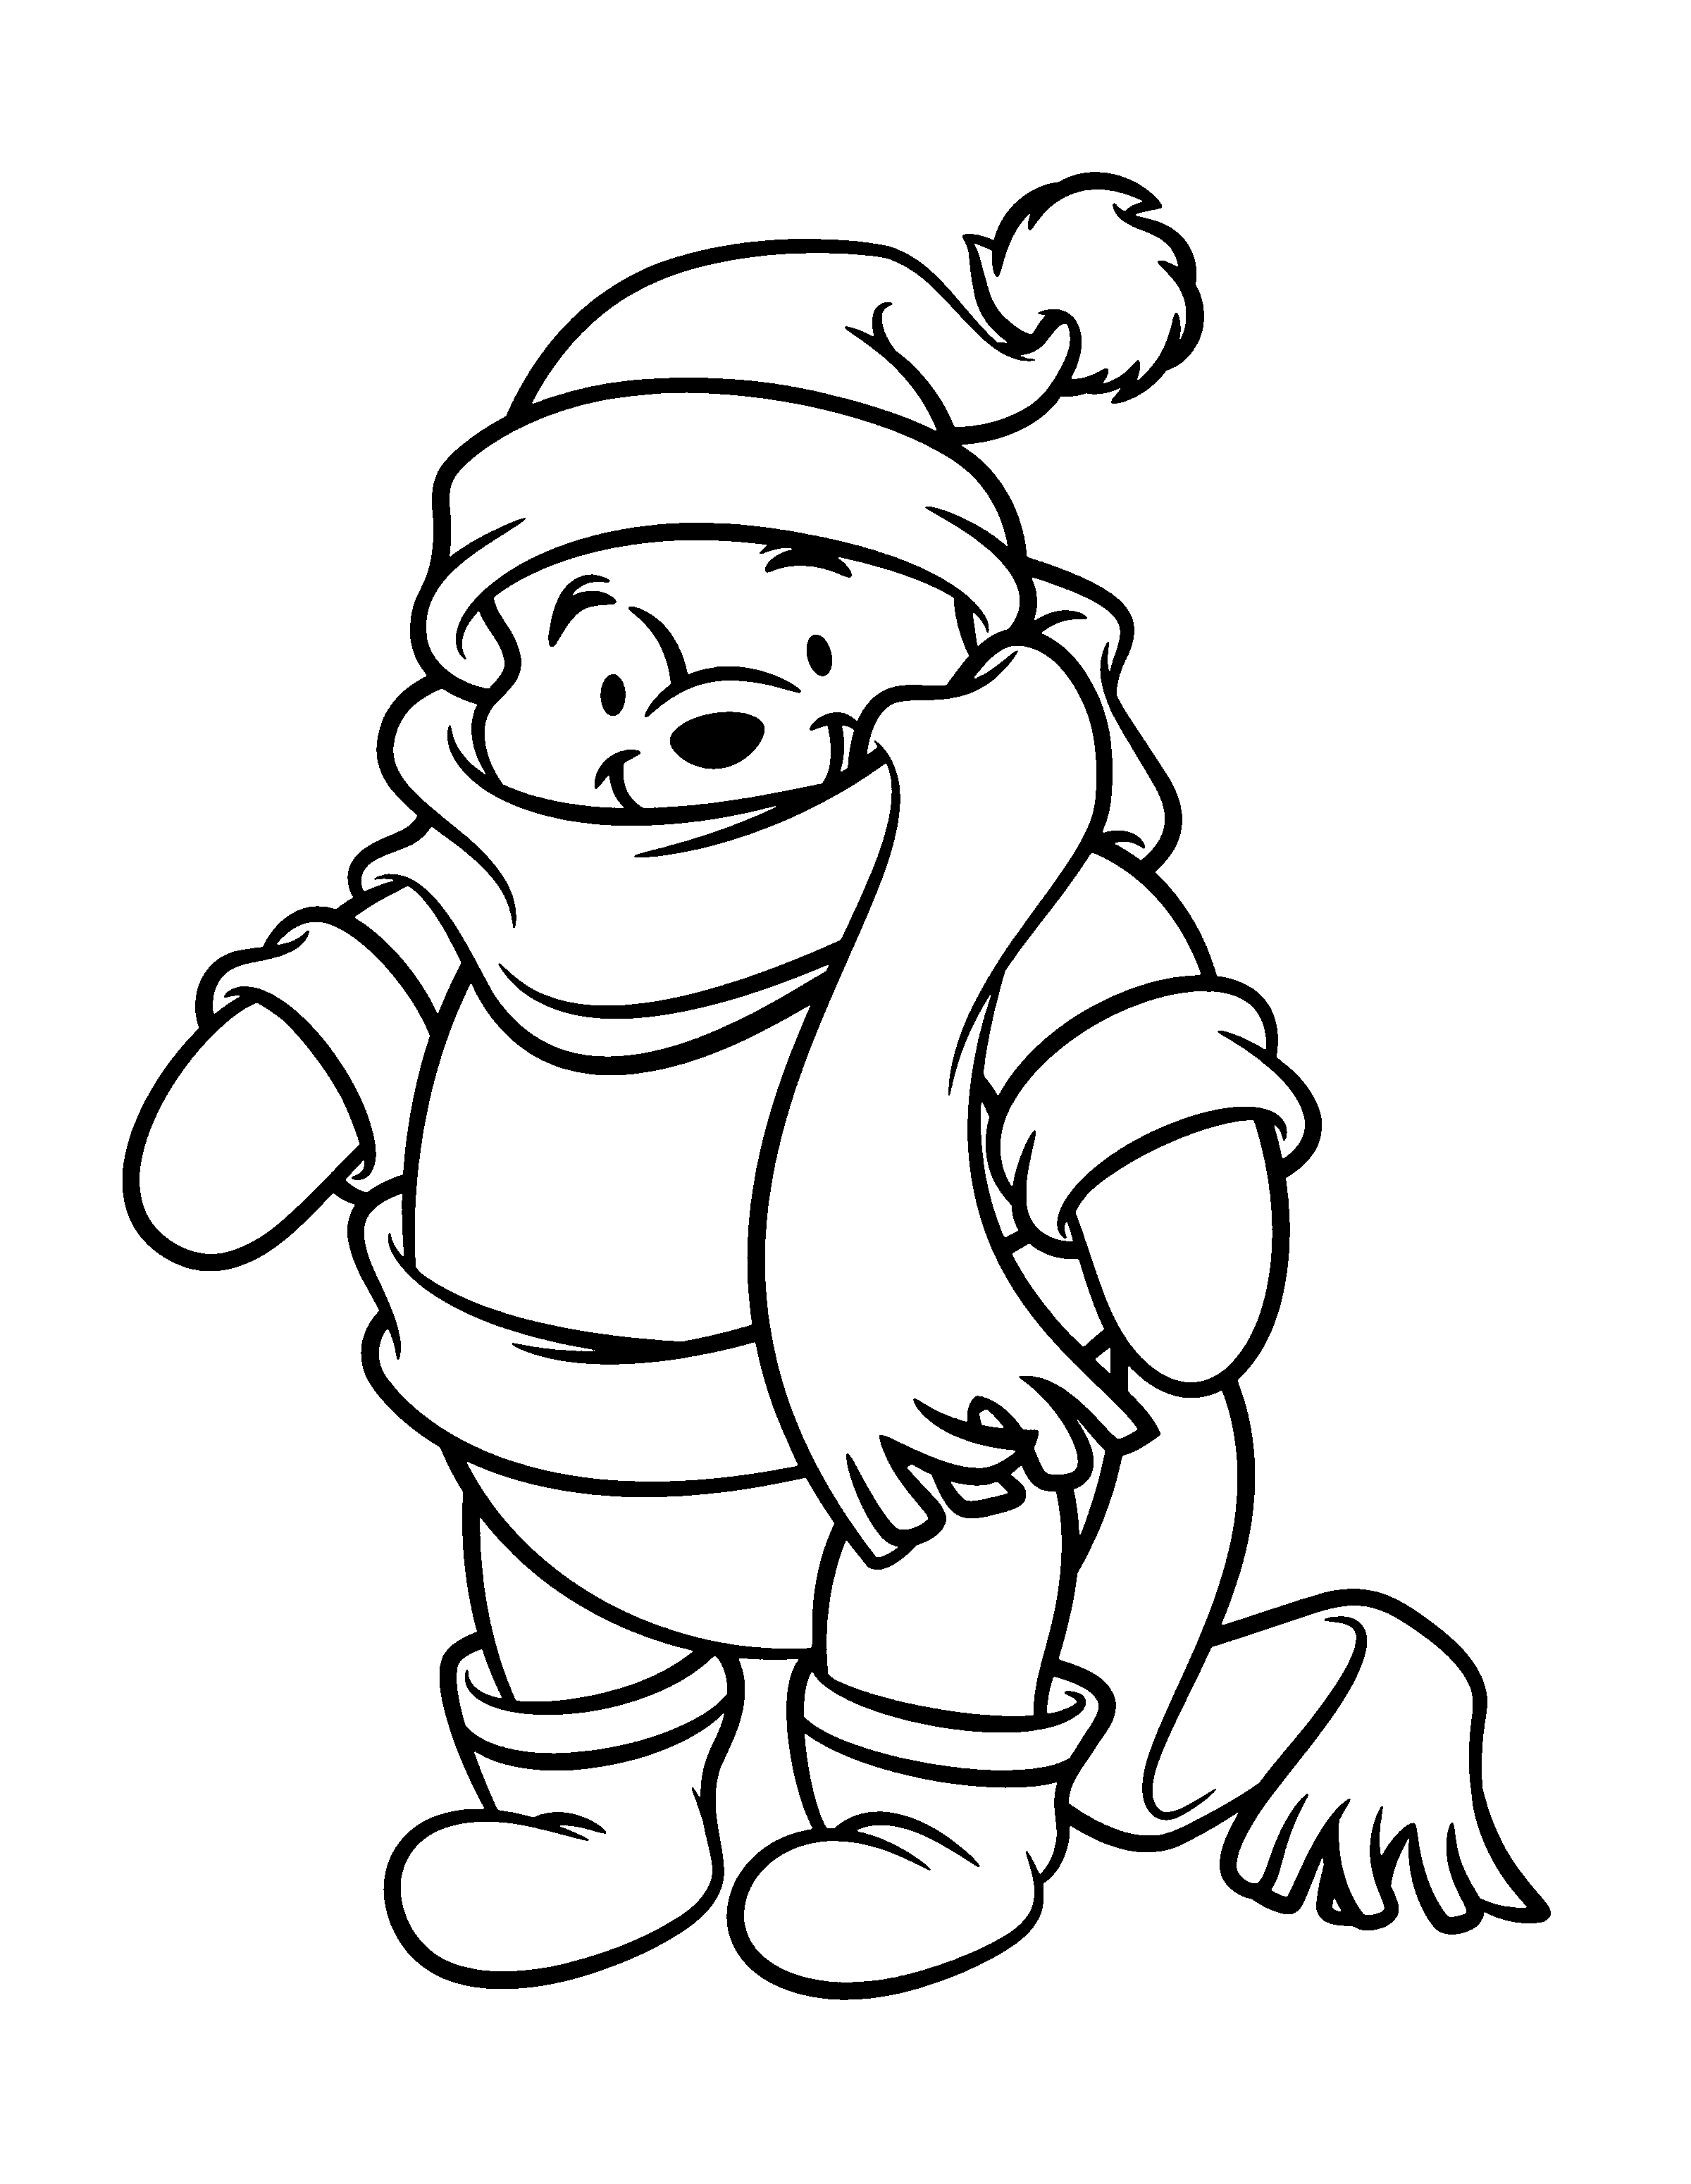 Pooh in Winter Clothes Coloring Page | Animal pages of ...